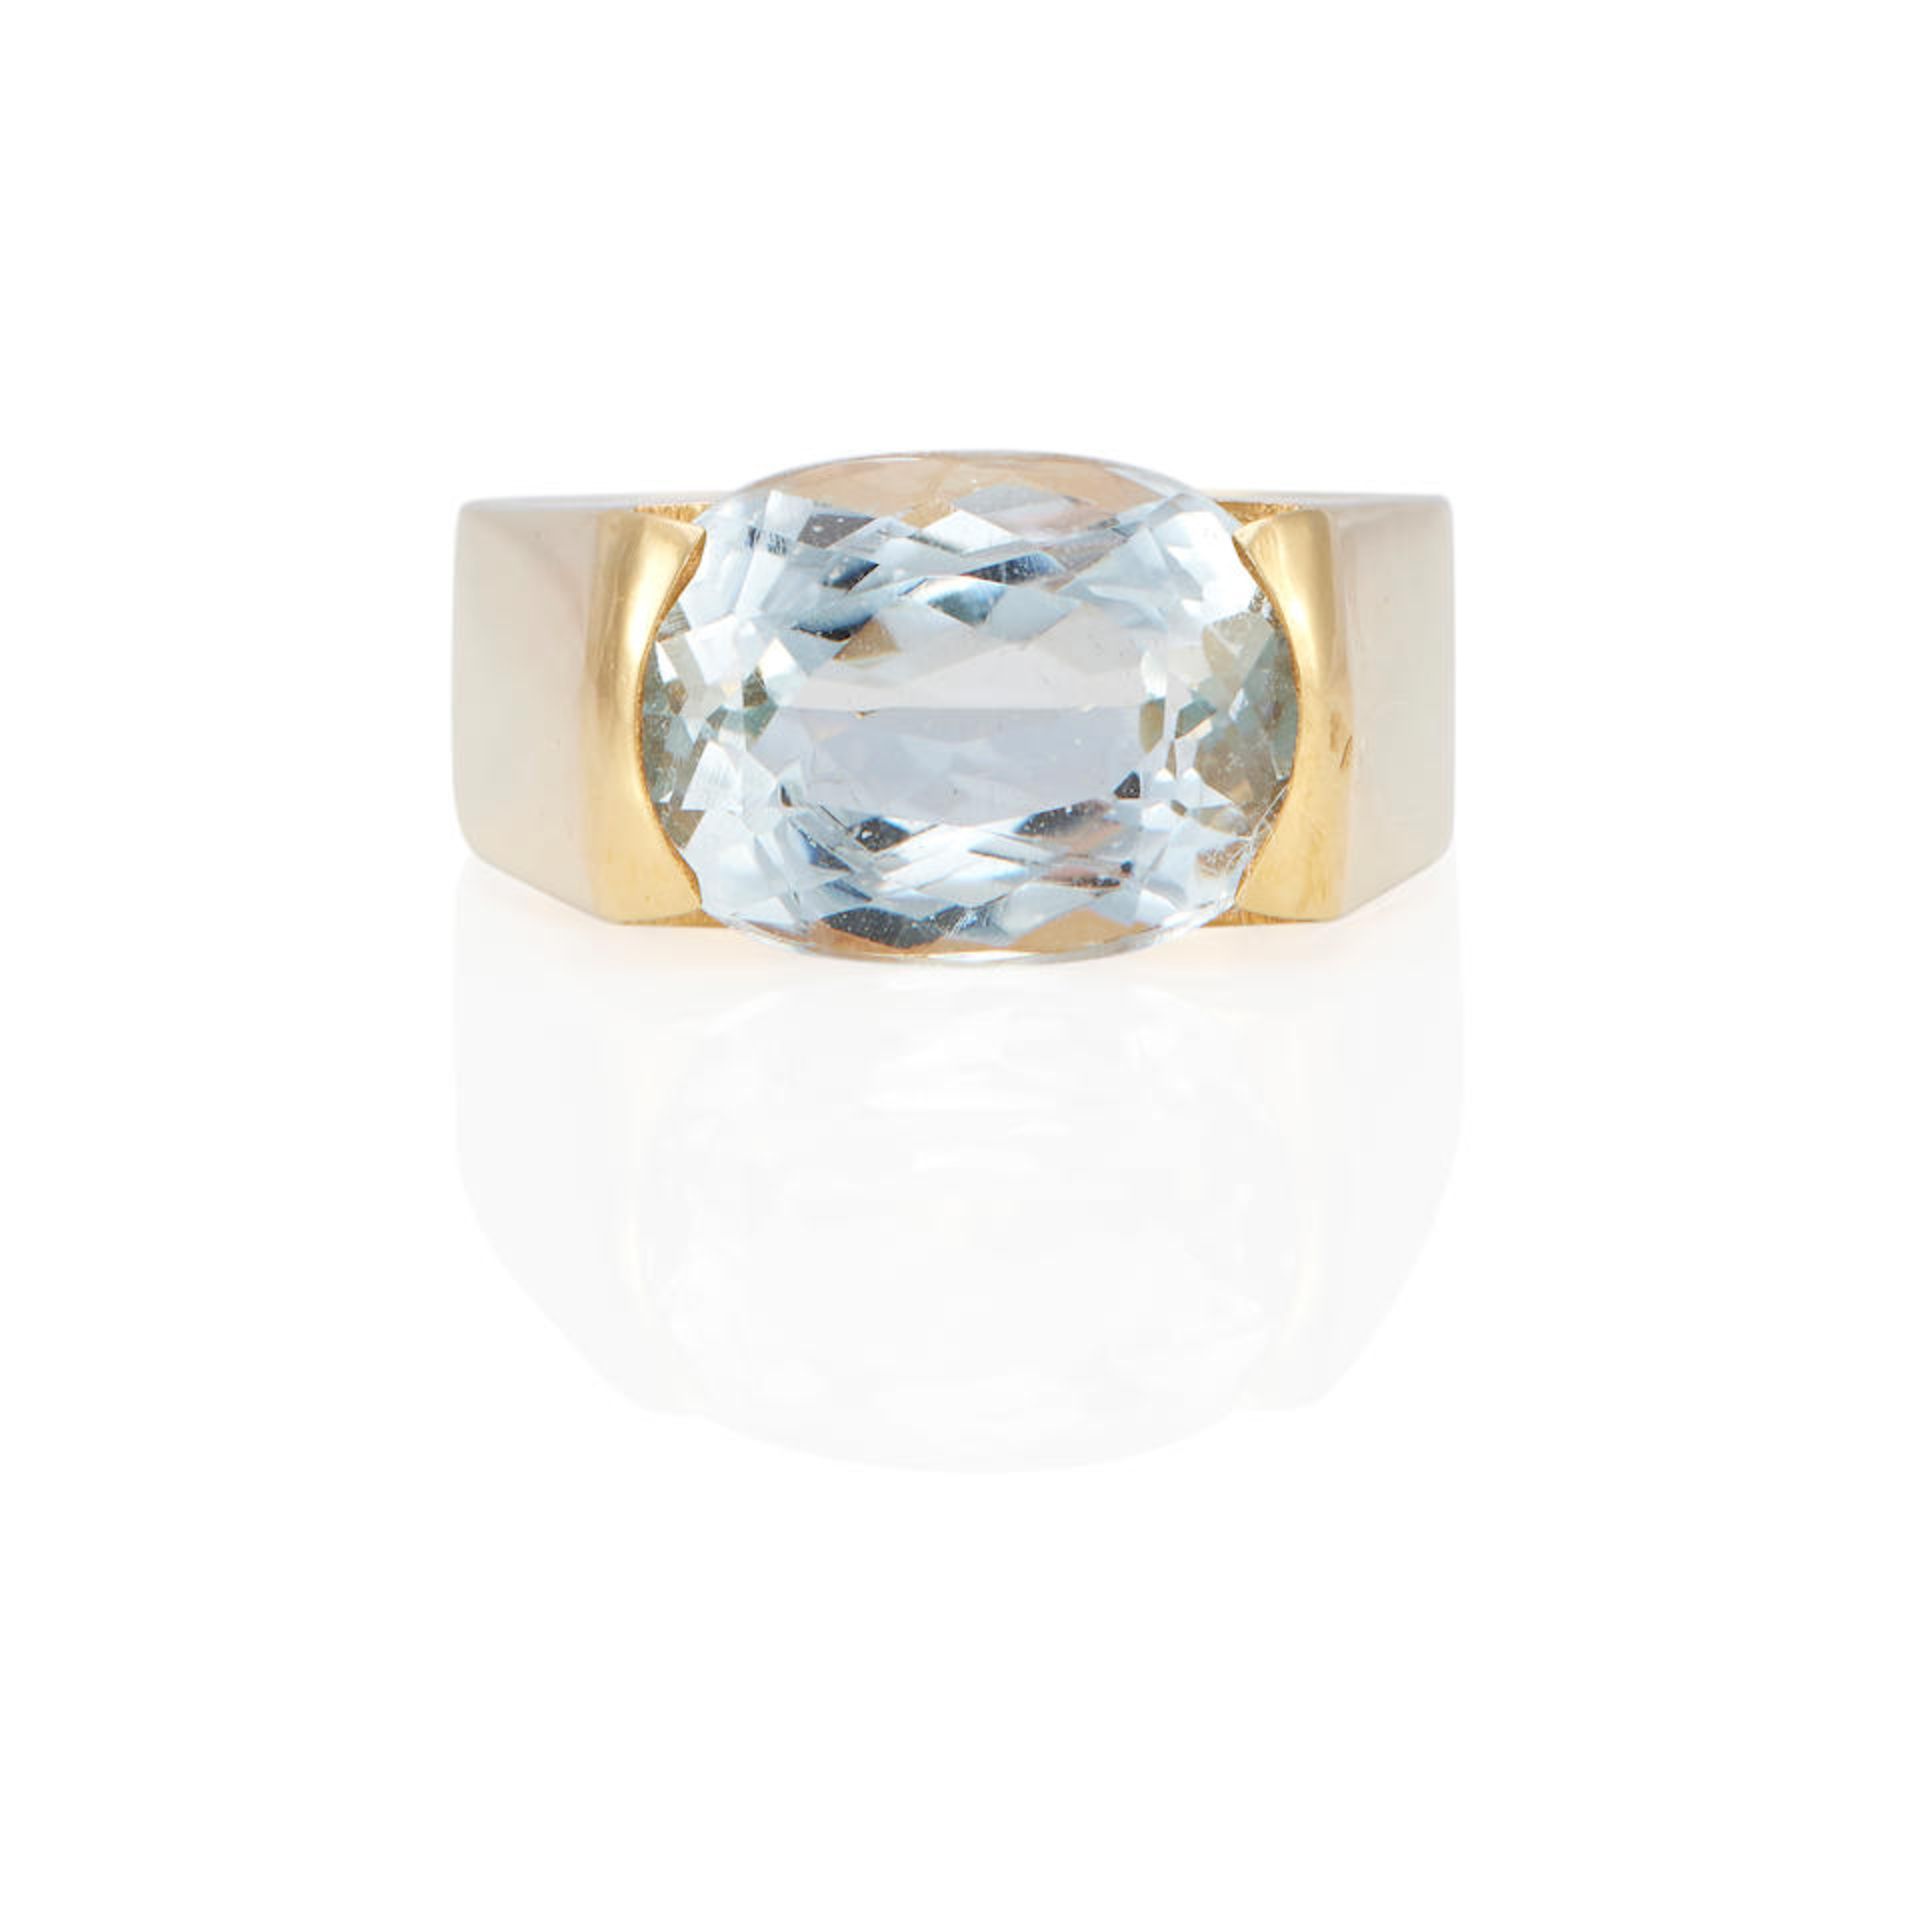 AN 18K GOLD AND AQUAMARINE RING